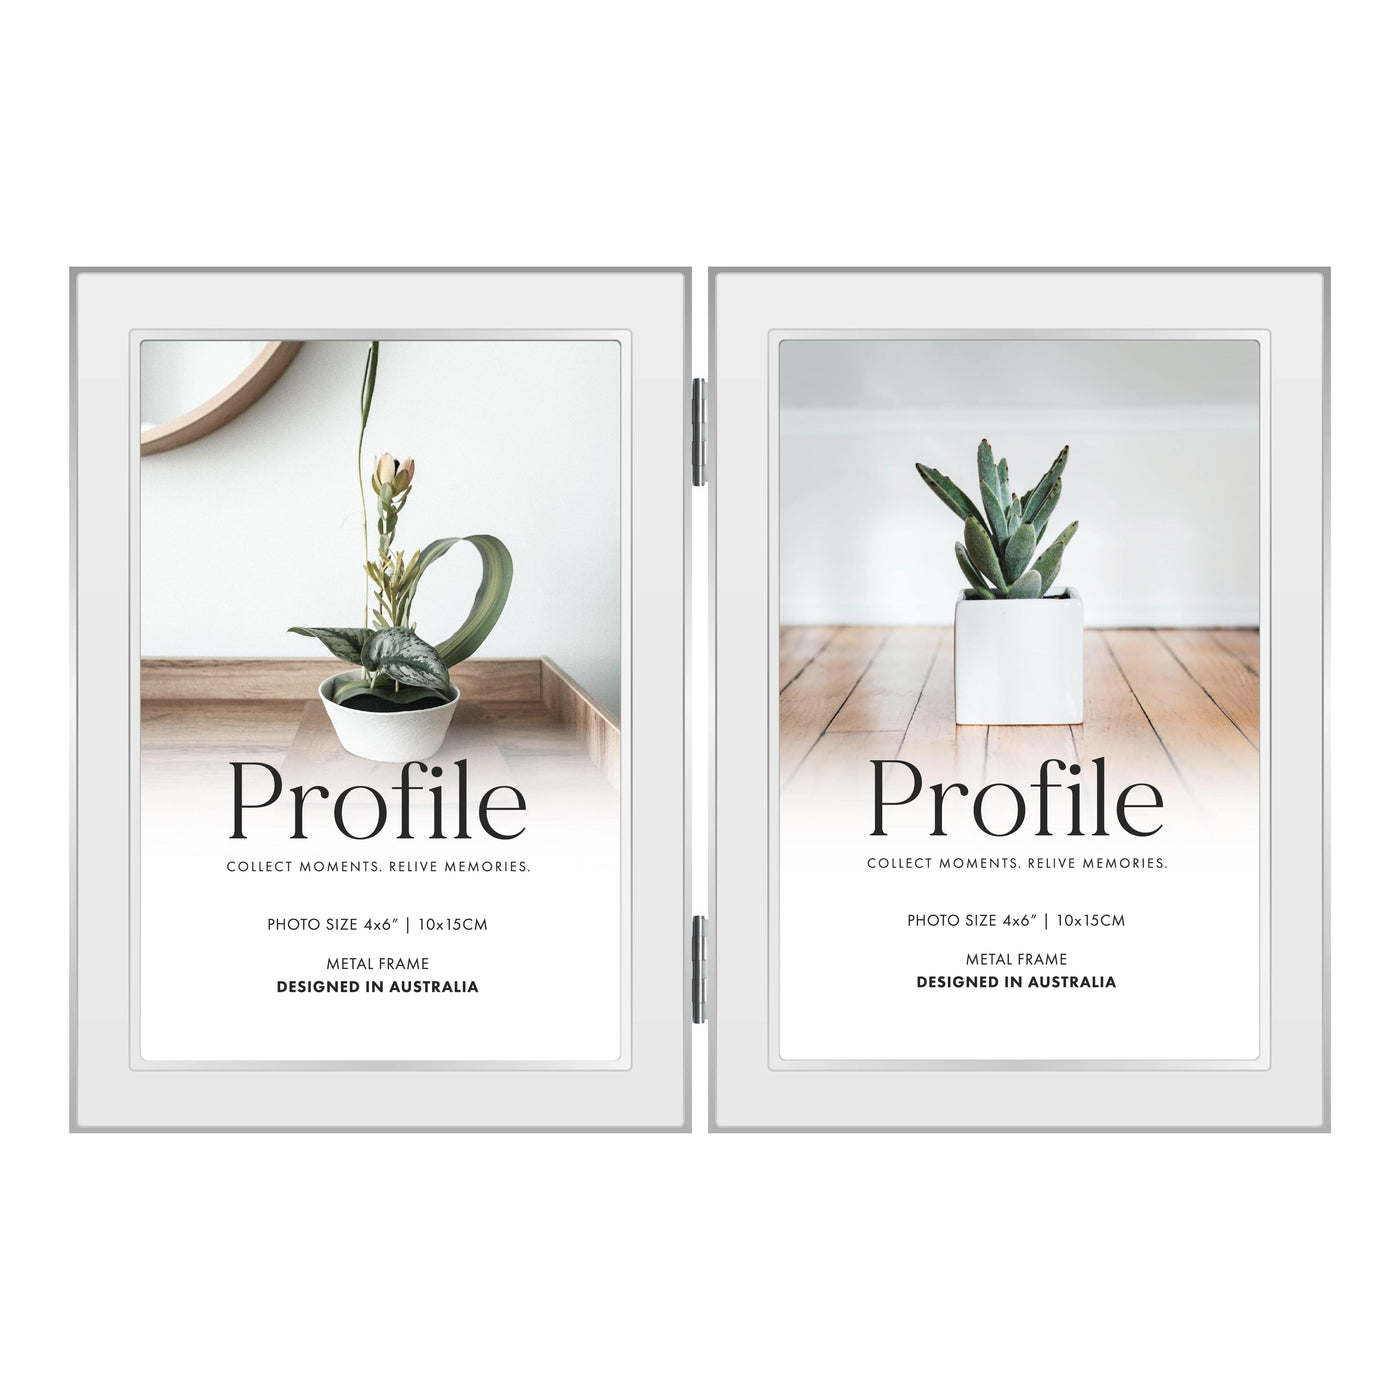 Eternal Hinged Double White Metal Photo Frame 4x6in (10x15cm) (2)V from our Metal Photo Frames collection by Profile Products Australia